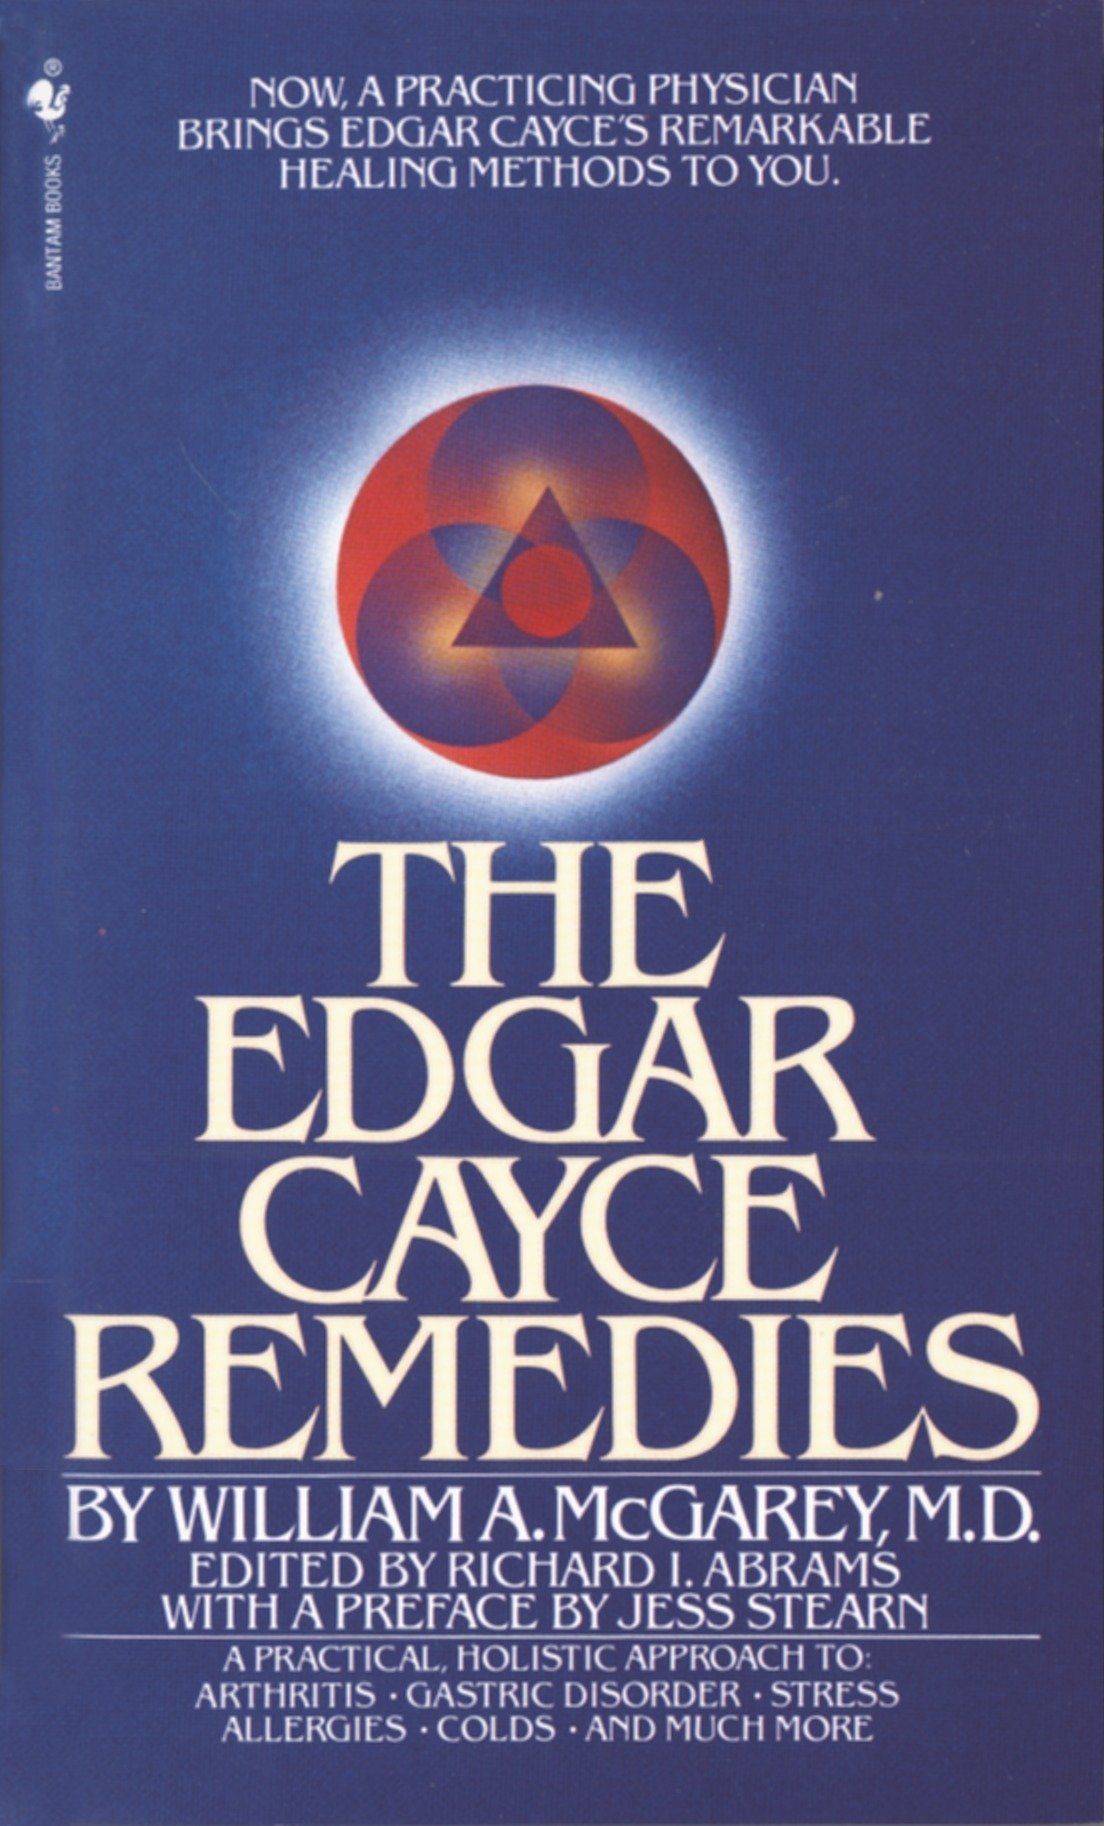 The Edgar Cayce Remedies: A Practical, Holistic Approach to Arthritis, Gastric Disorder, Stress, Allergies, Colds, and Much More (Copy) (Copy)